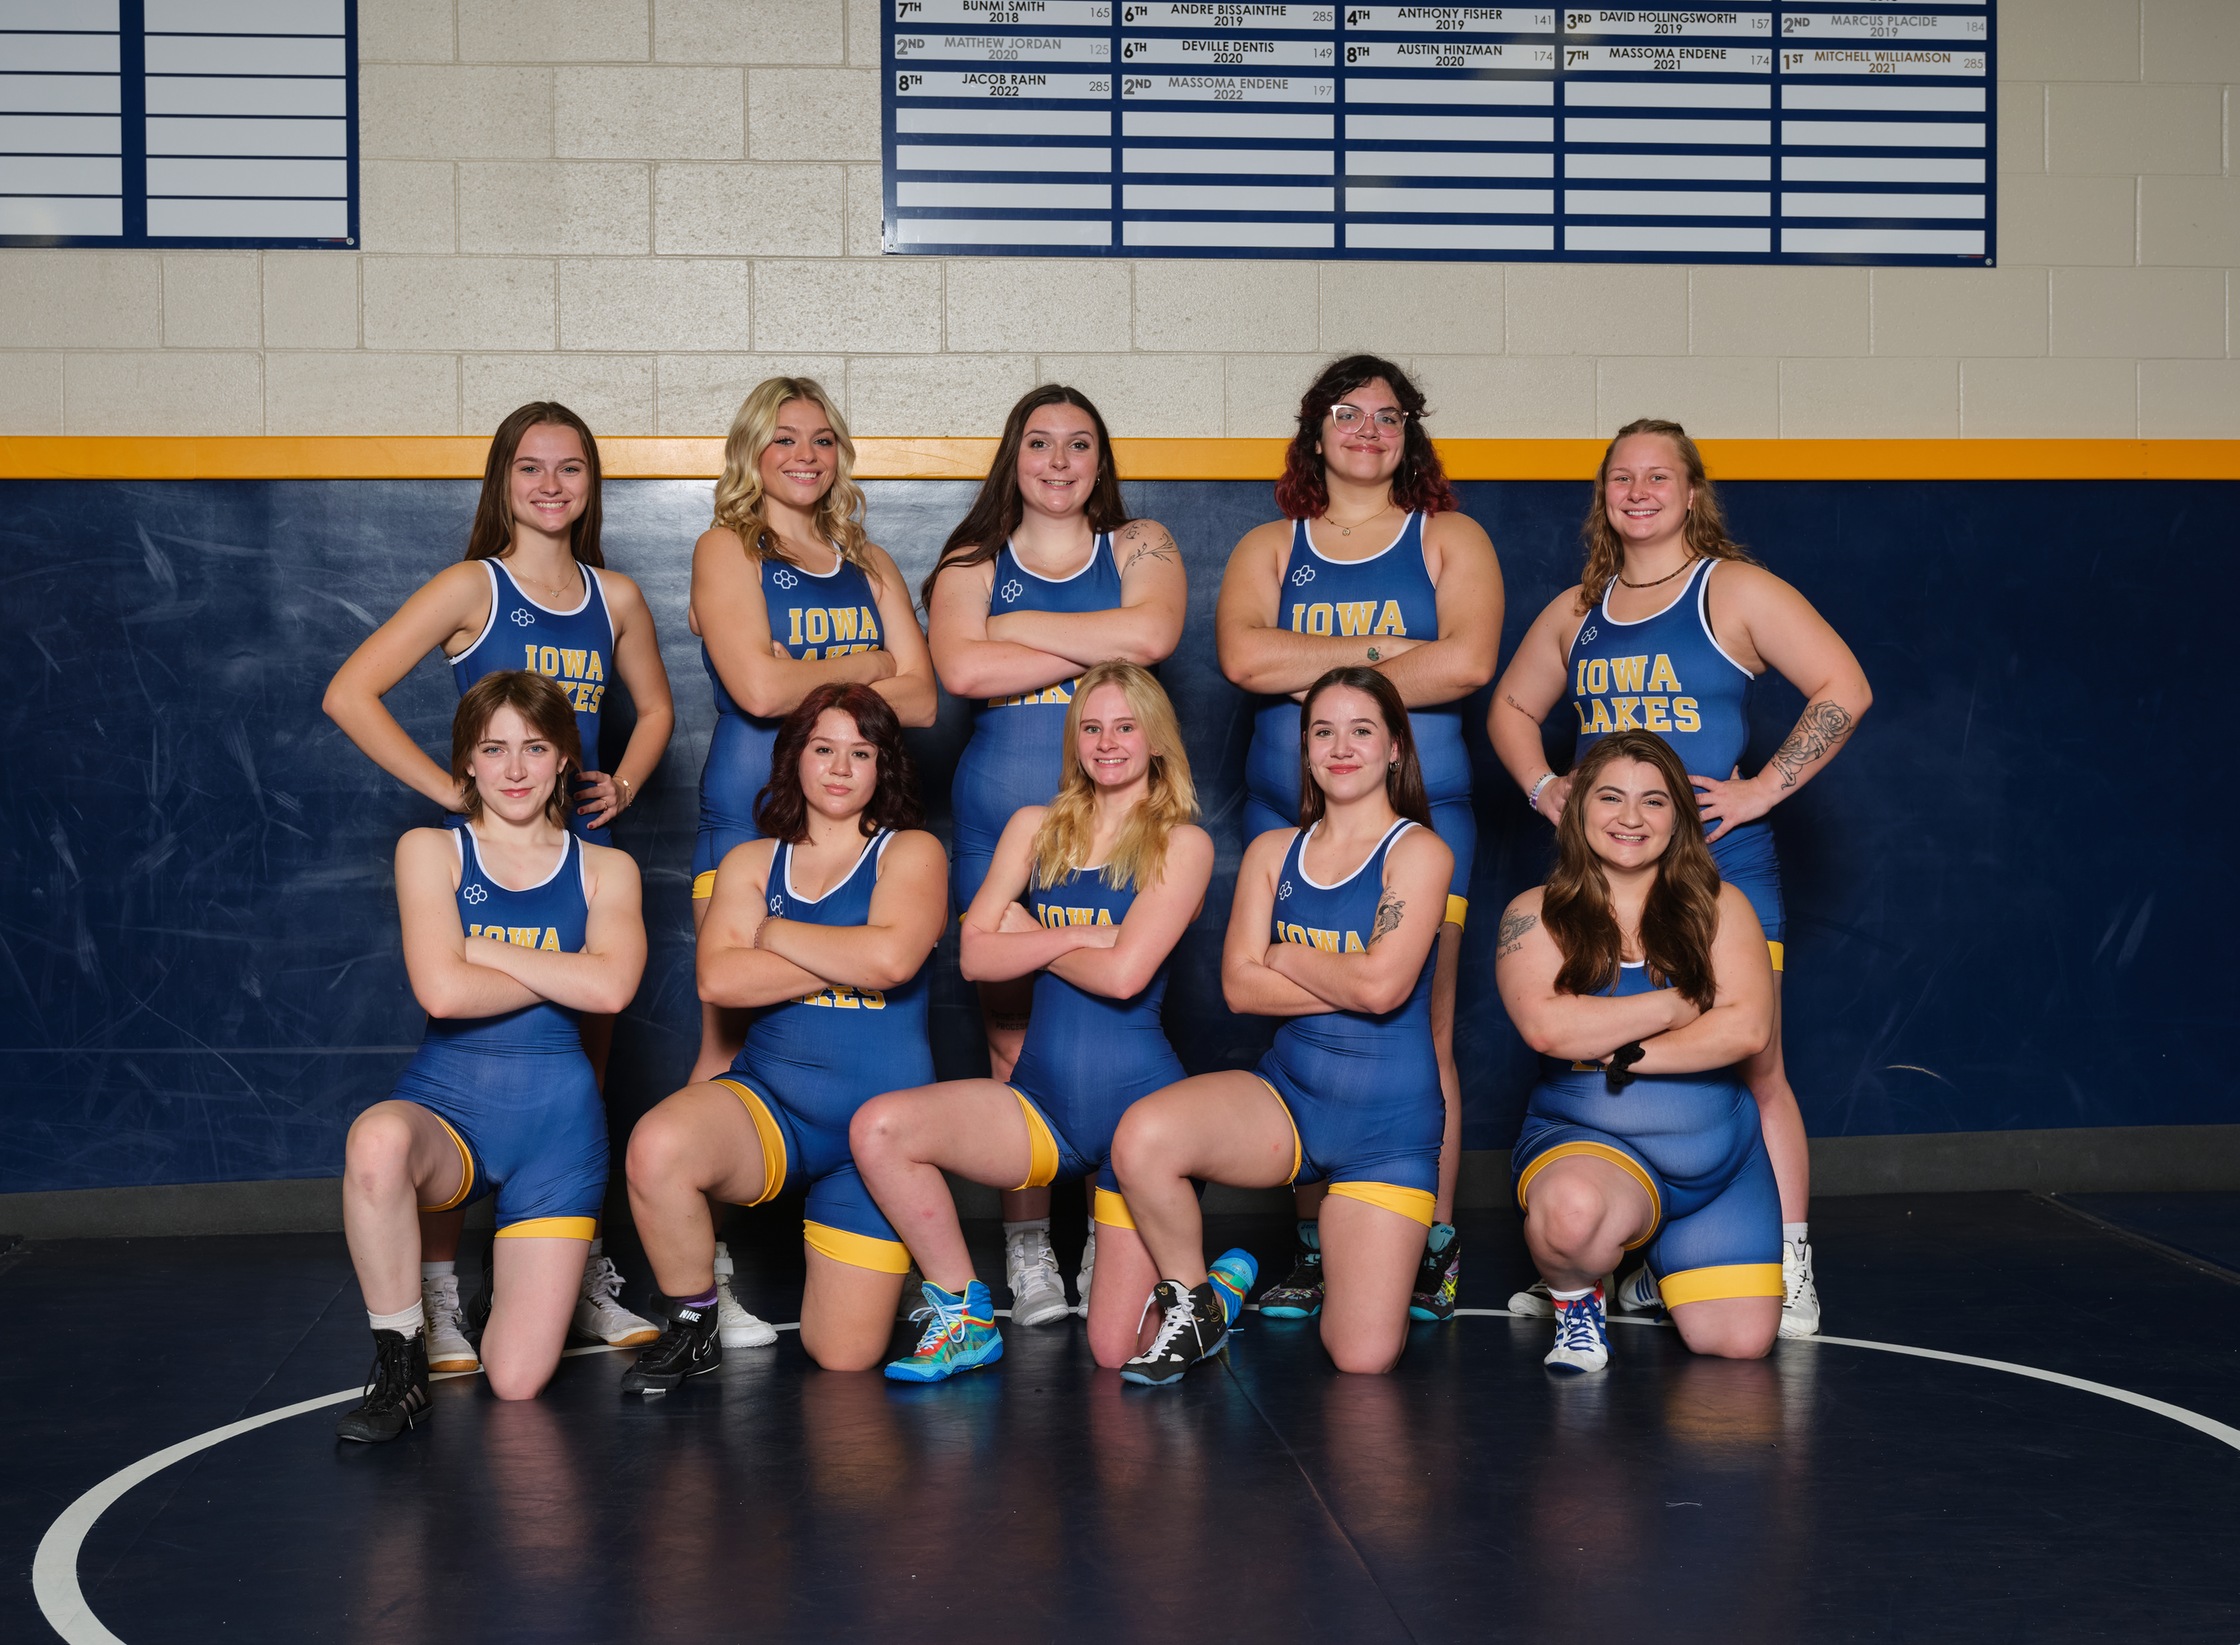 Iowa Lakes Competes in First Ever Home Dual Against #1 Indian Hills